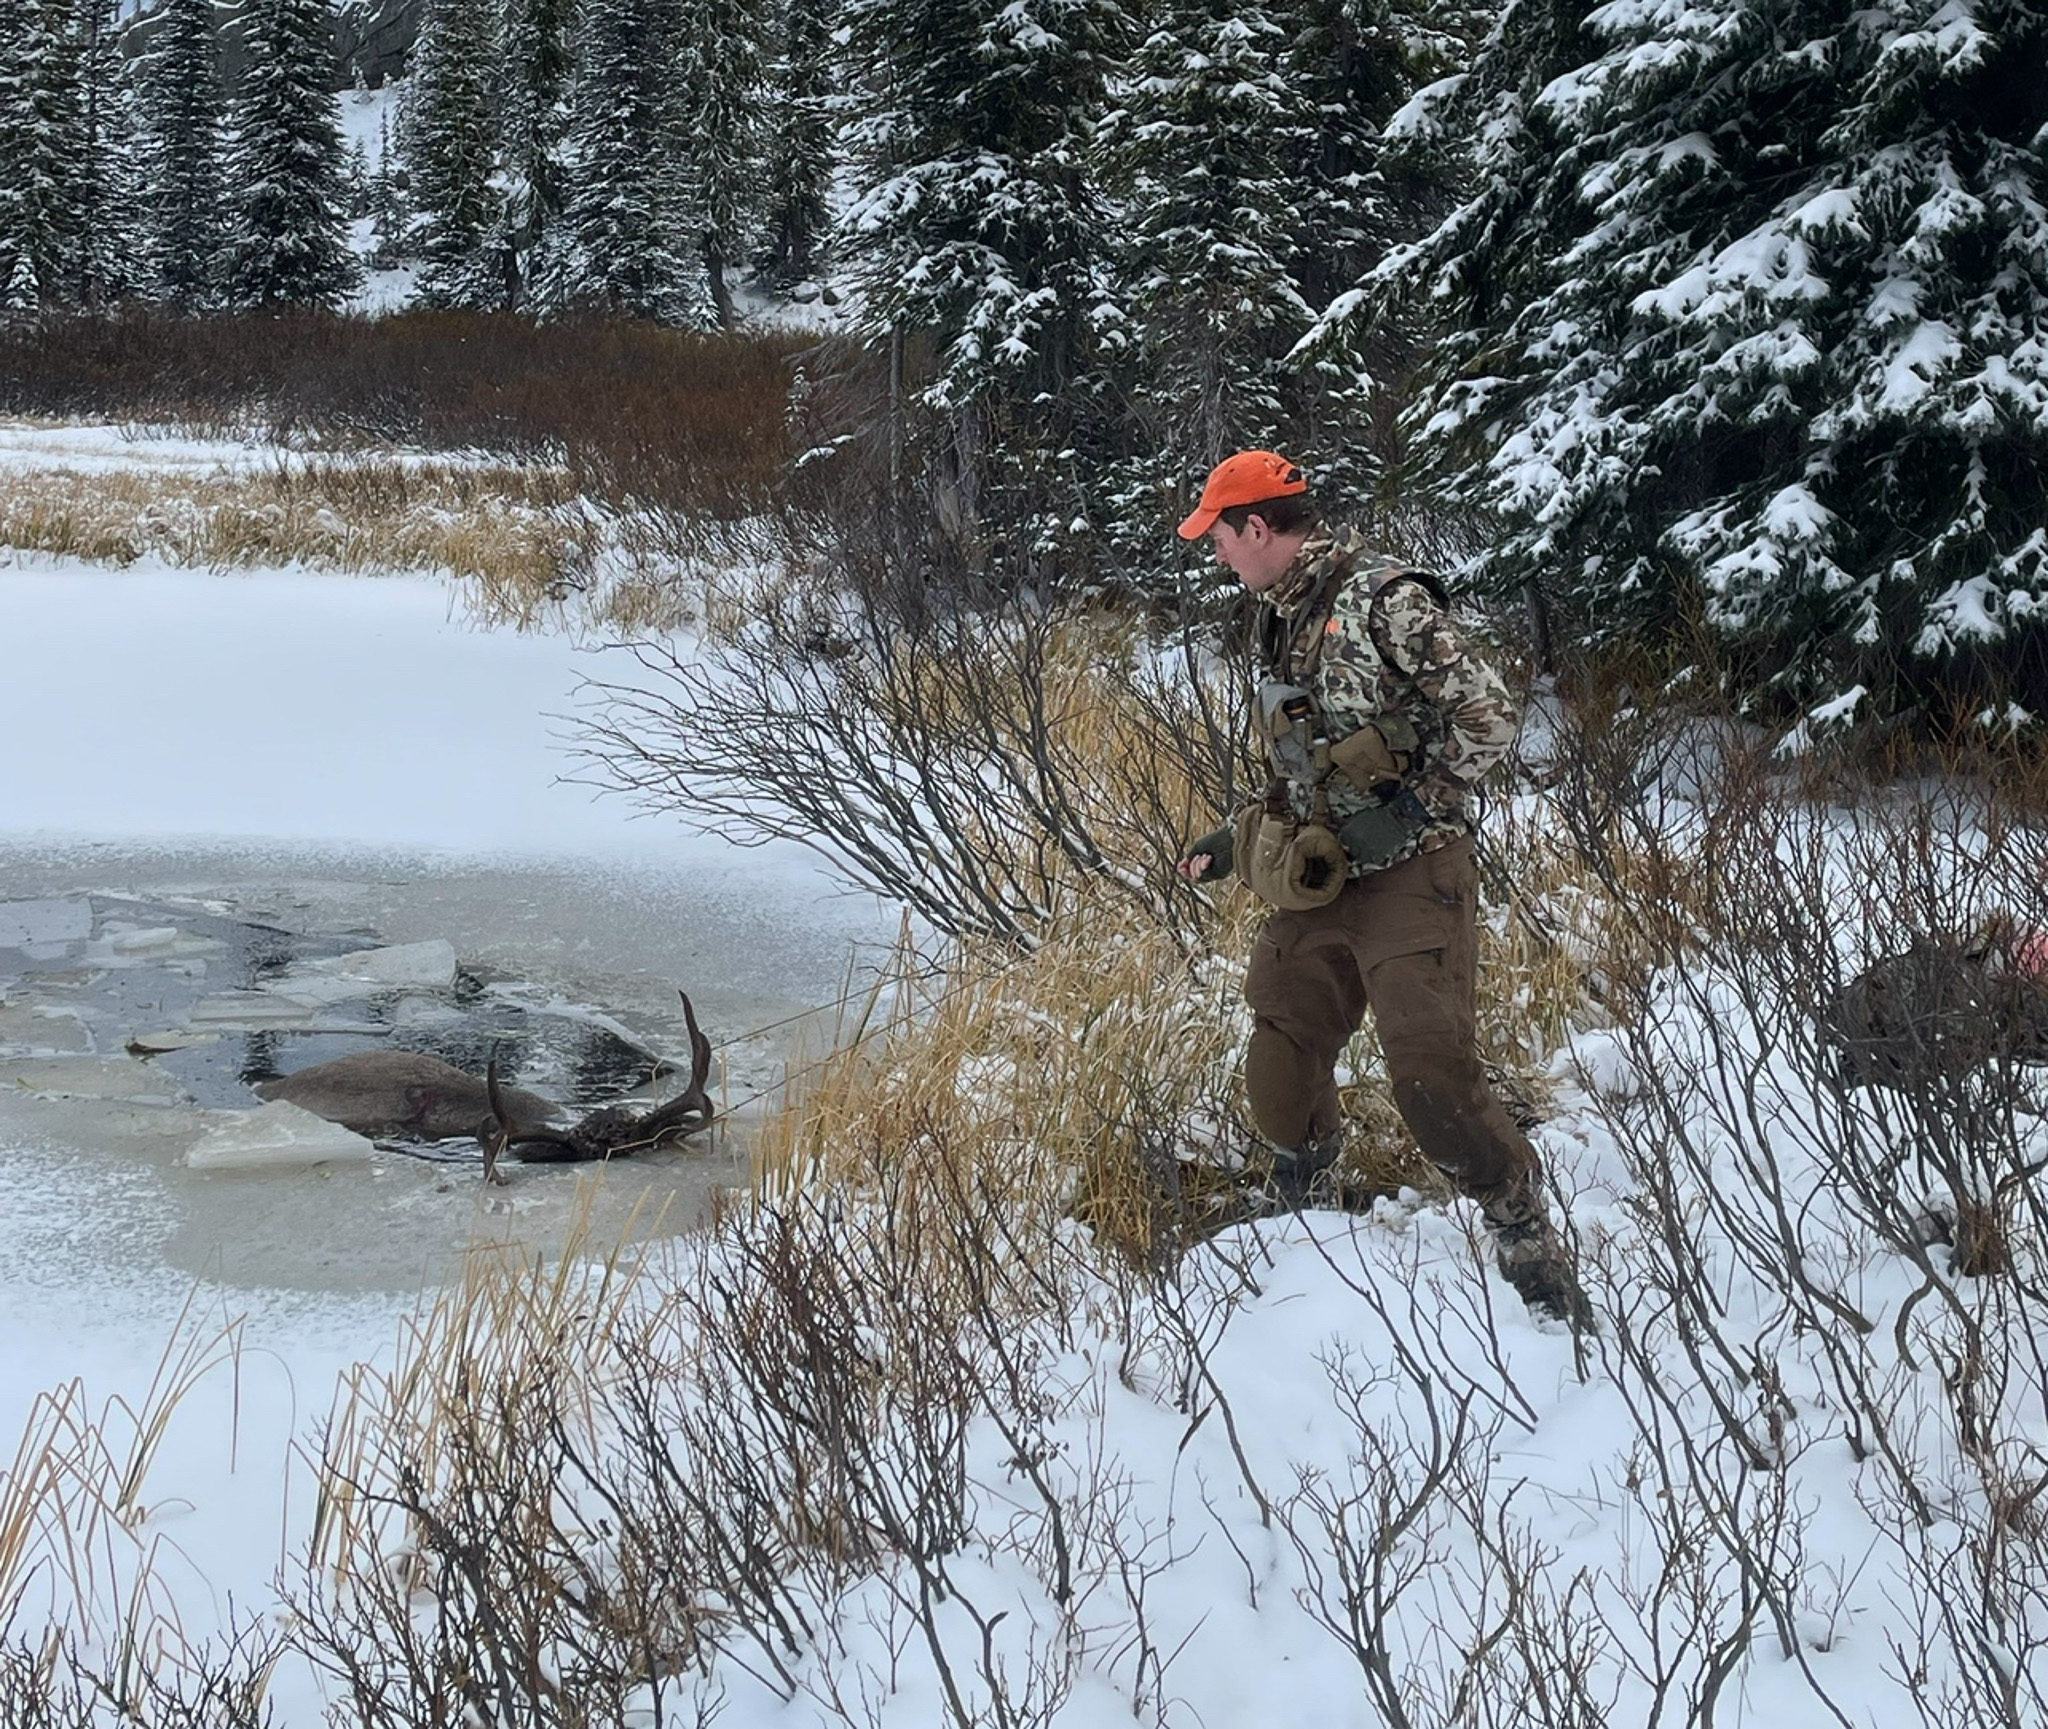 A hunter tries to haul in a deer half-submerged in an icy pond using paracord.